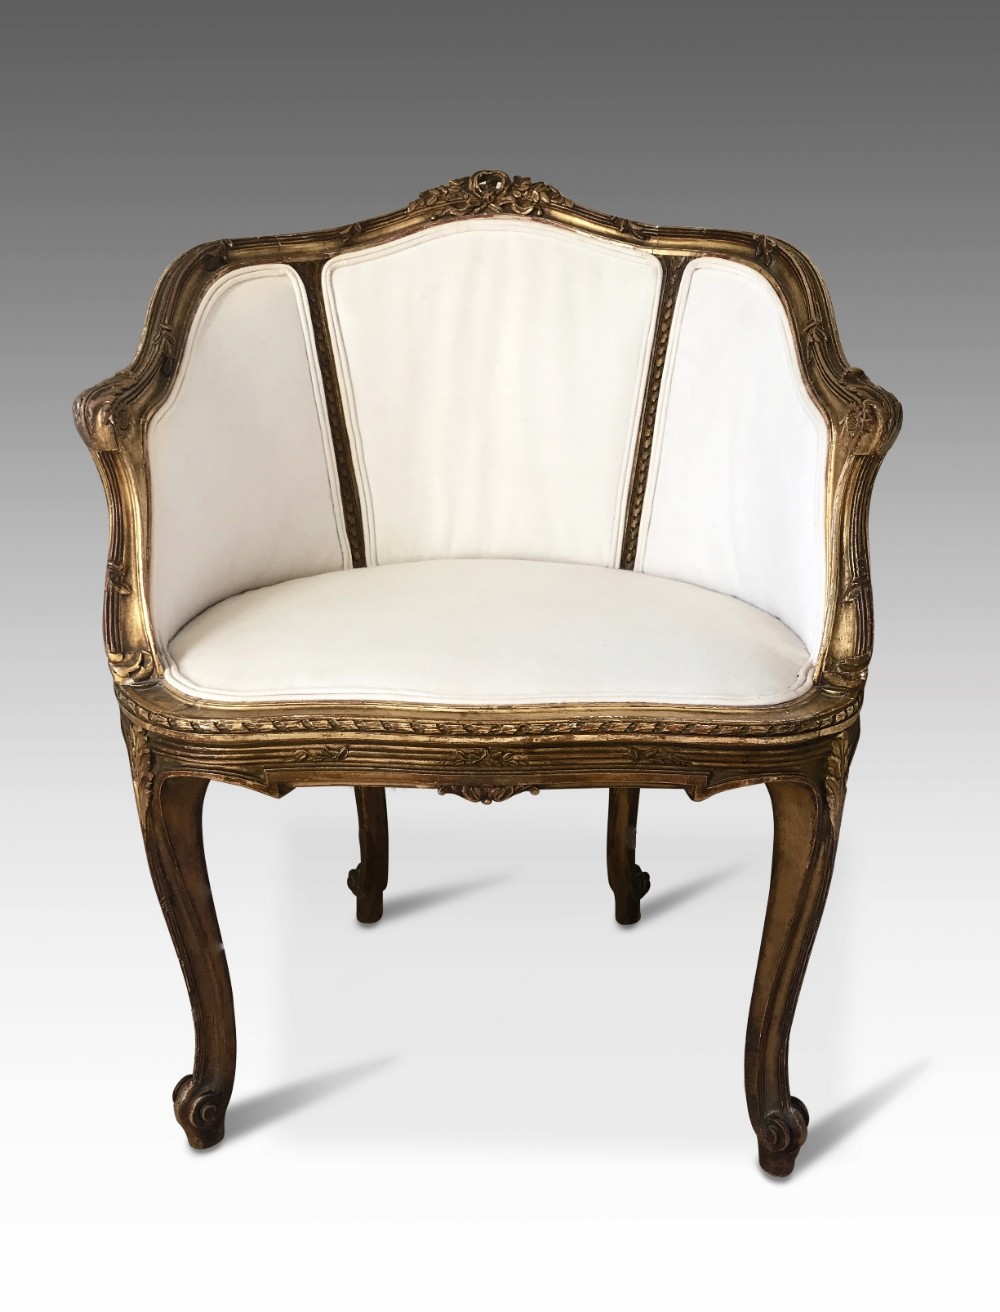 a fine french guilt armchair c1850